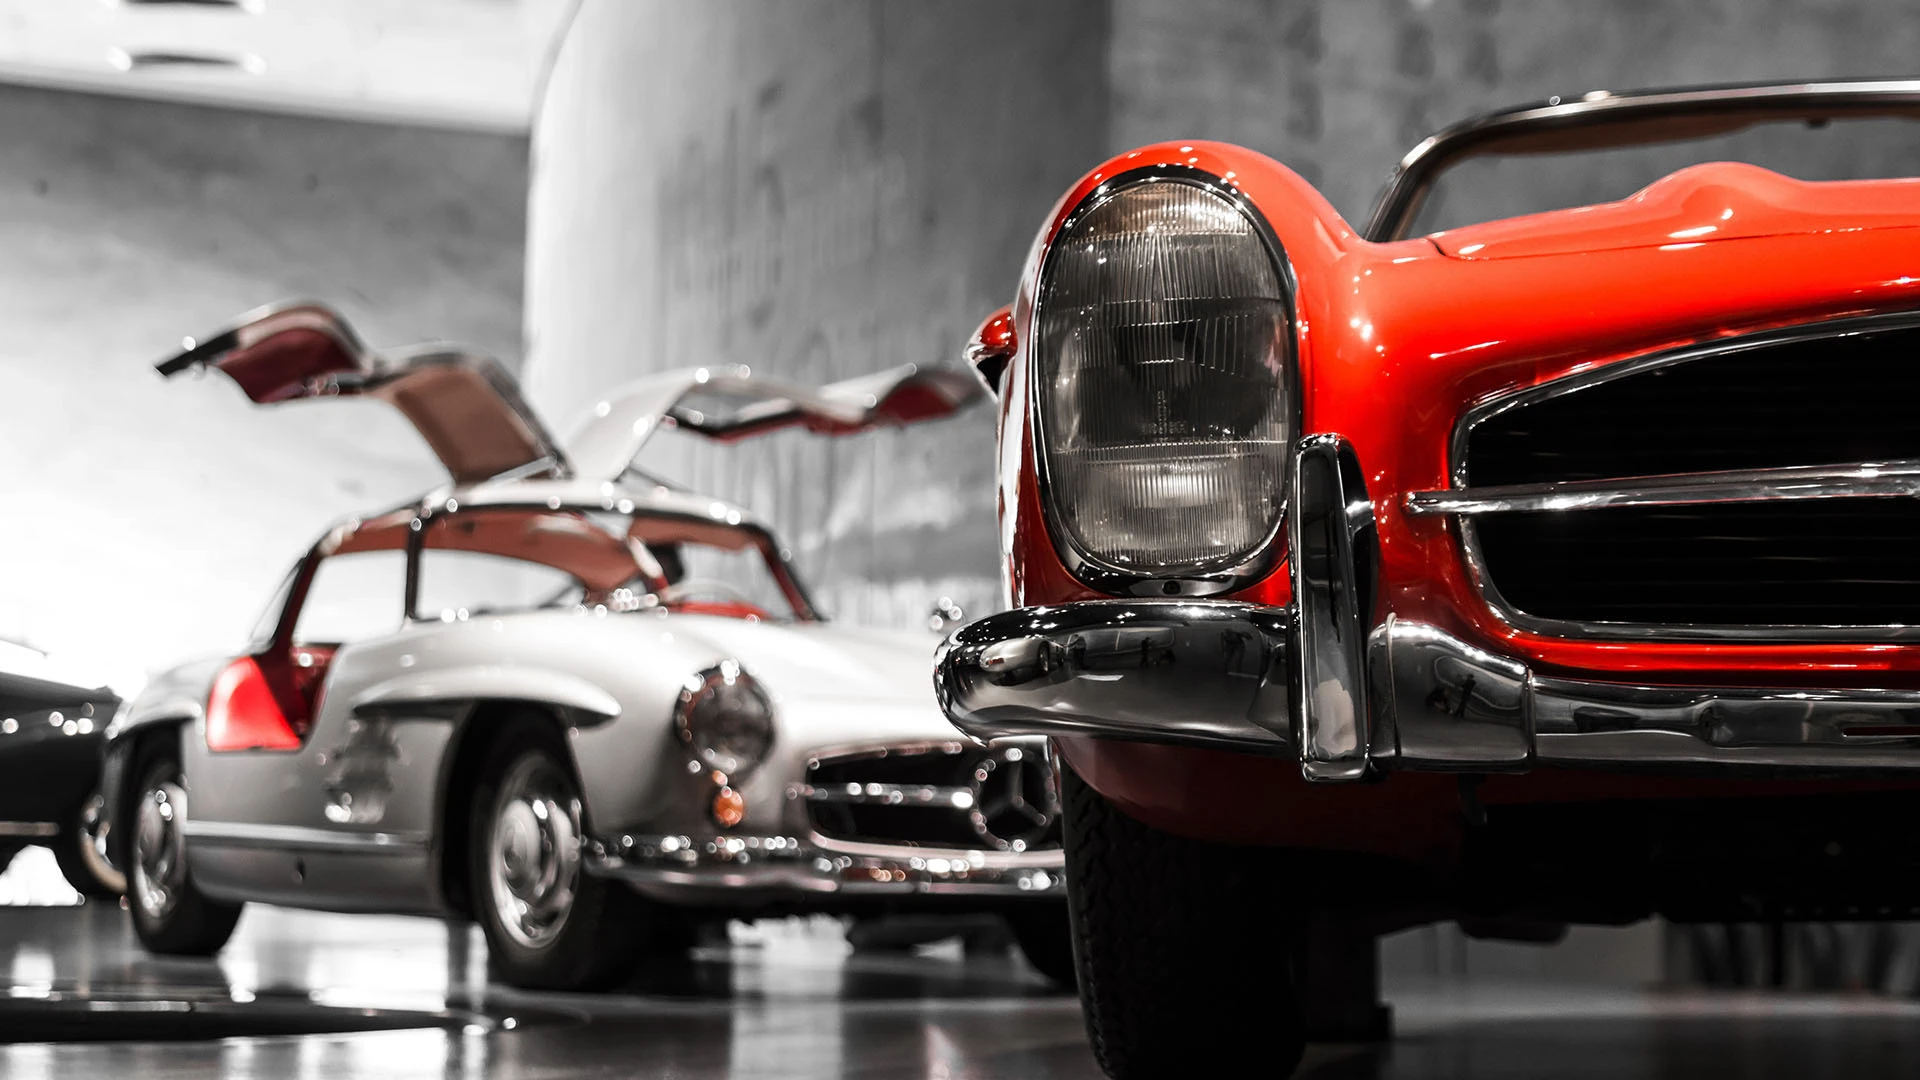 Silver and Read Mercedes 300L Gullwing classic cars in showroom